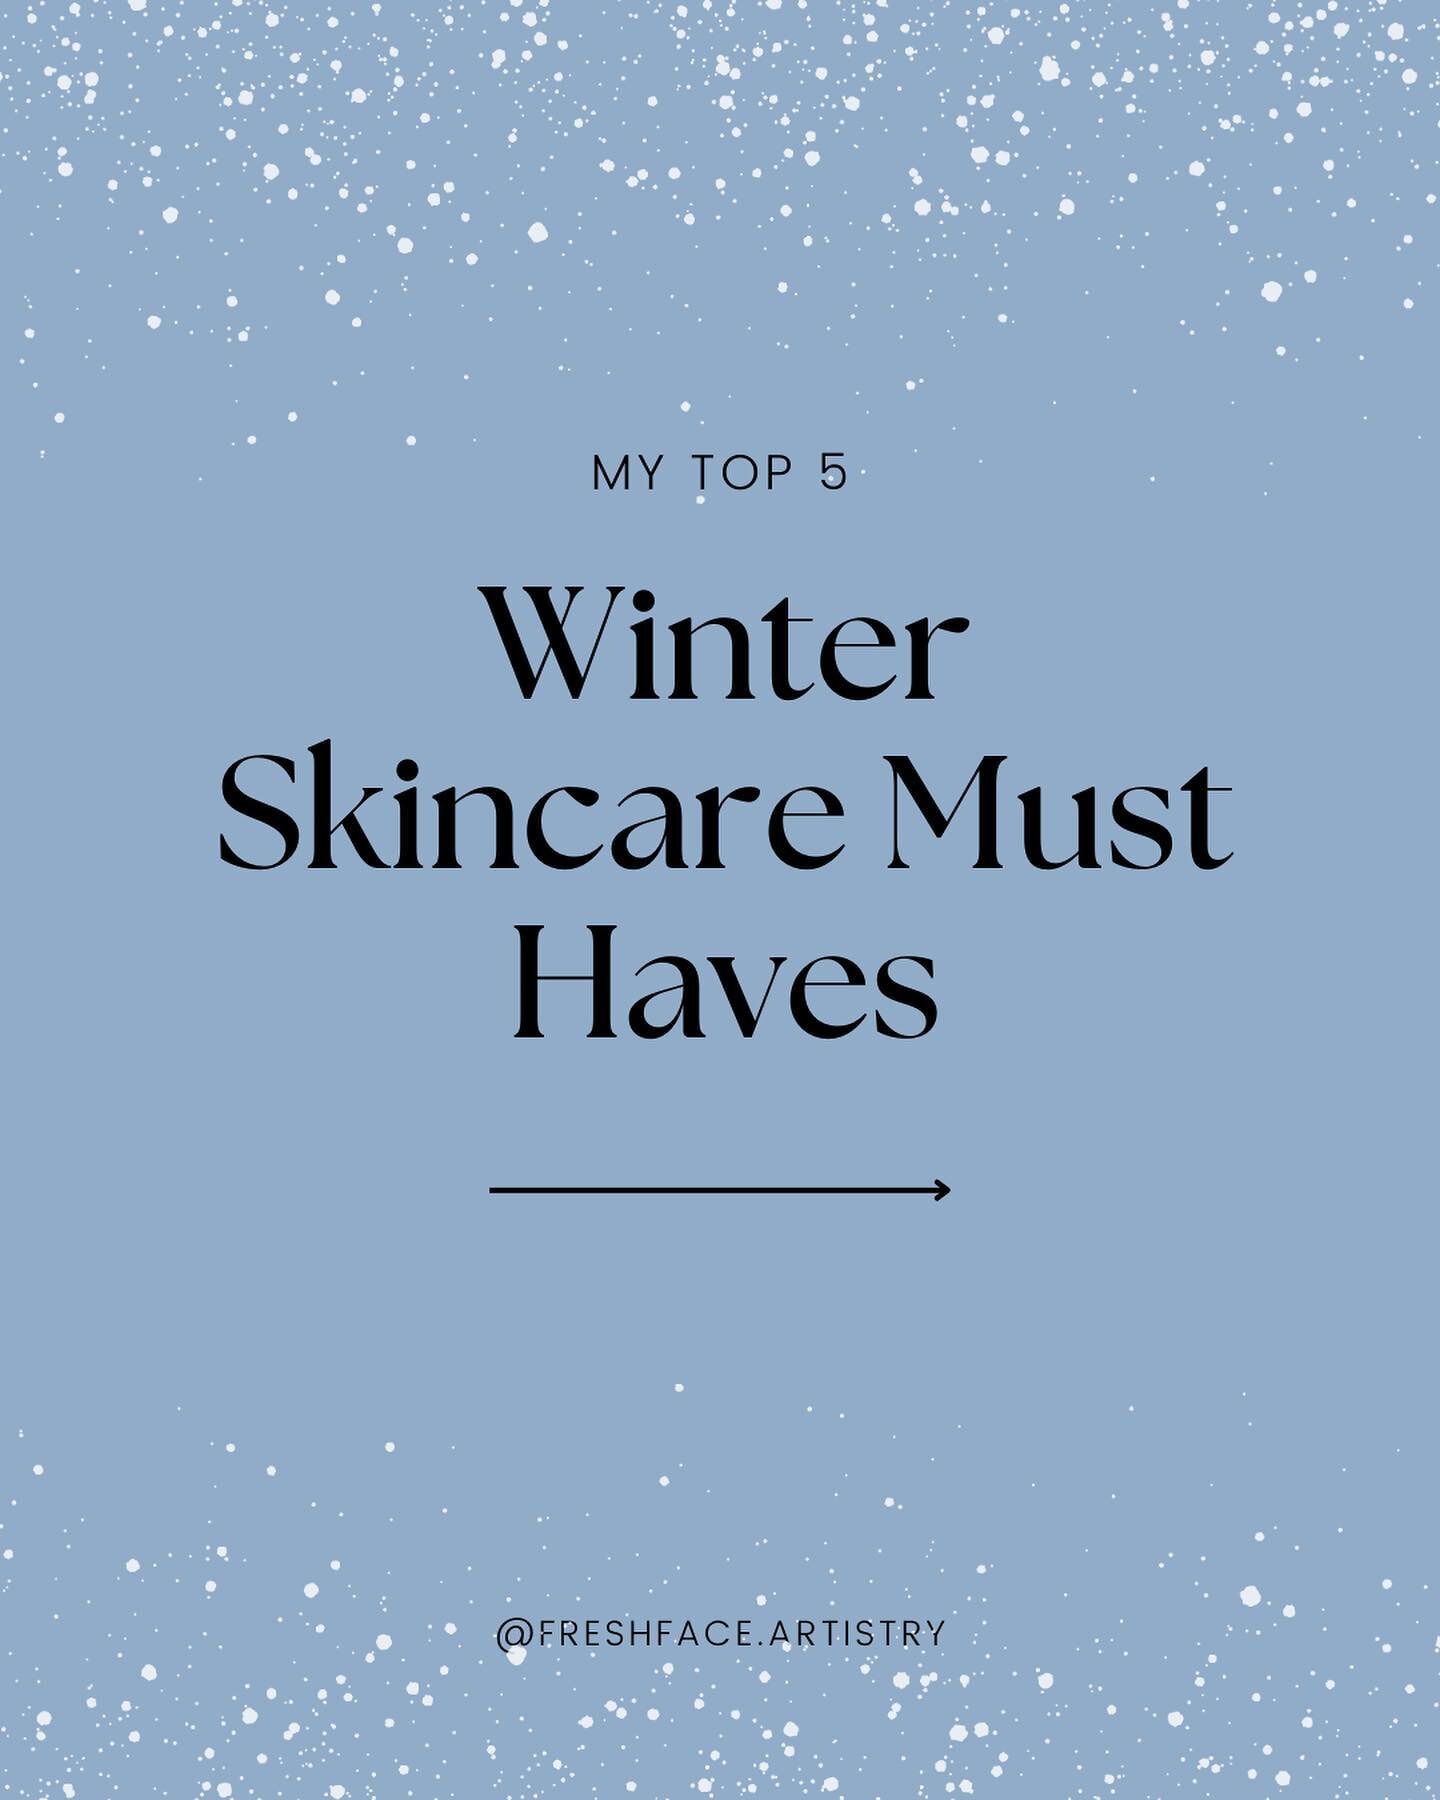 SAVE this post If Winter is causing your skin some major grief

🌟As a makeup artist specializing in natural beauty, I understand the importance of effortless yet impactful skincare routines, especially during the chilly season. 
Here are my Top 5 Wi